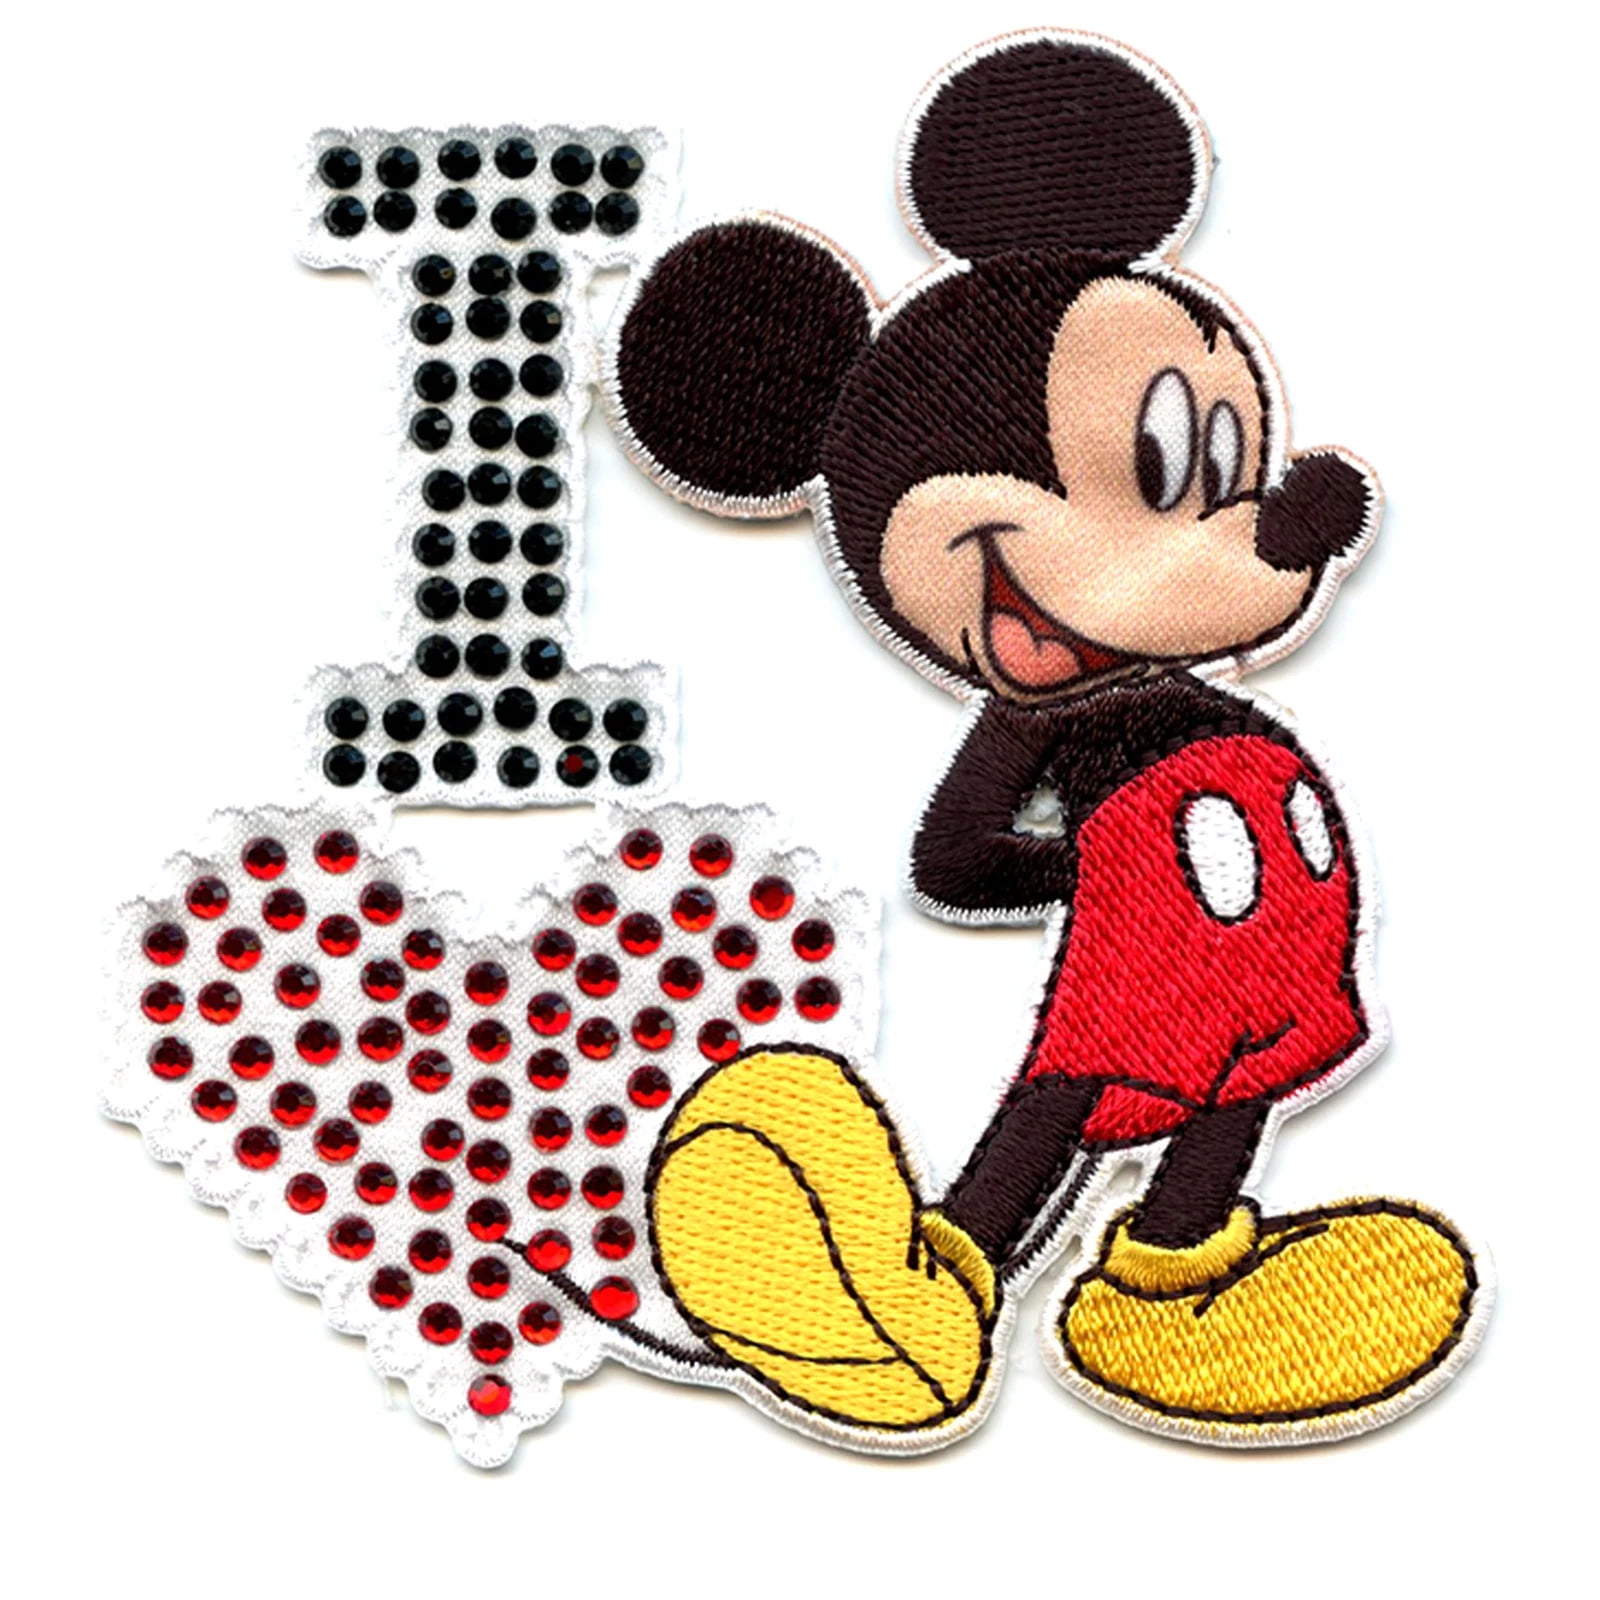 7.5" Disney mickey mouse 4 poses fabric applique iron on character 